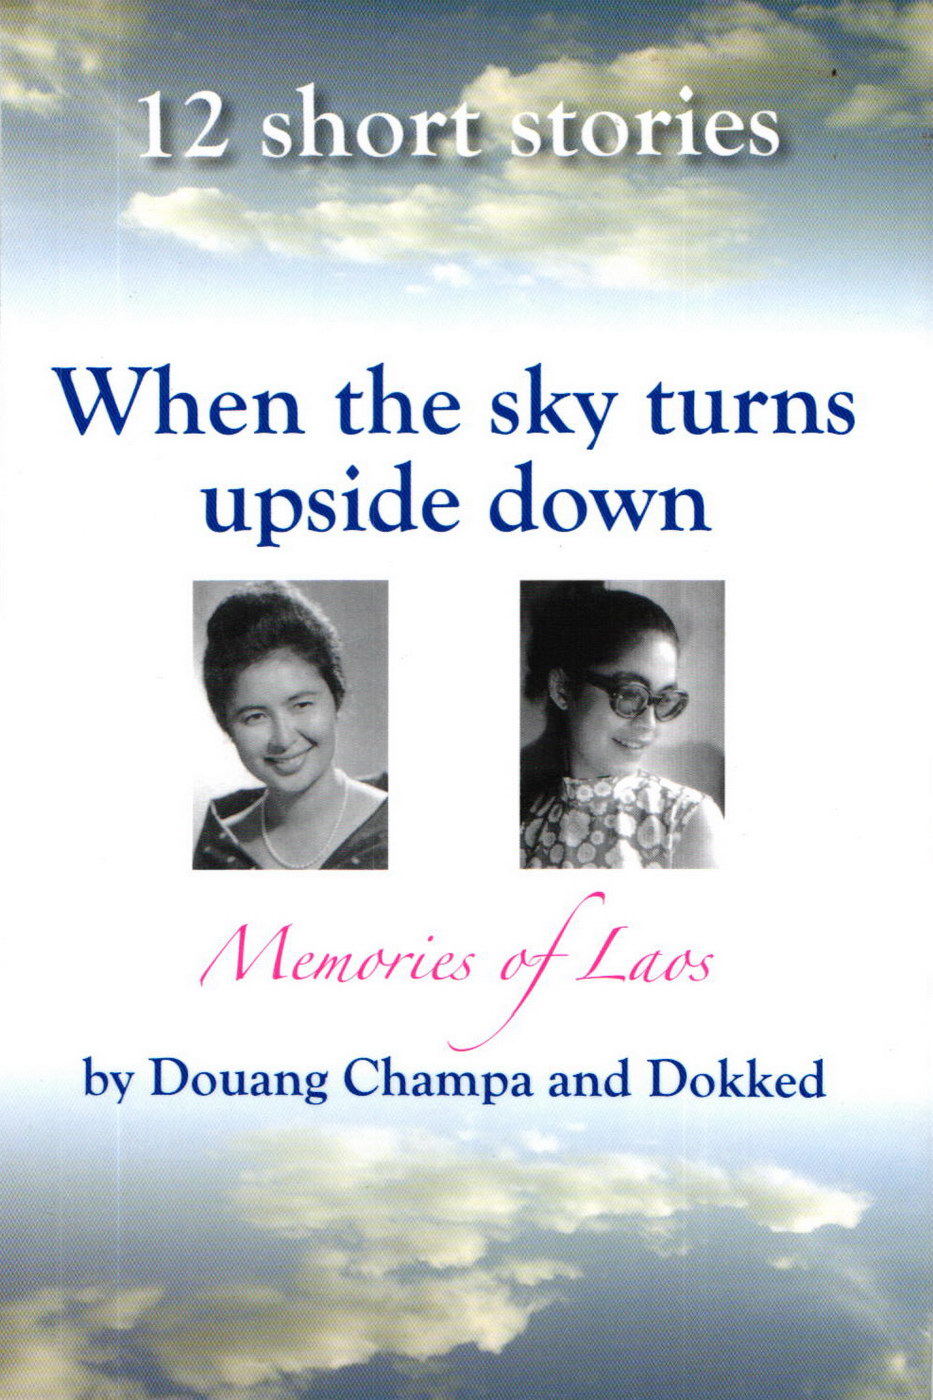 When the sky turns upside down - Memories of Laos